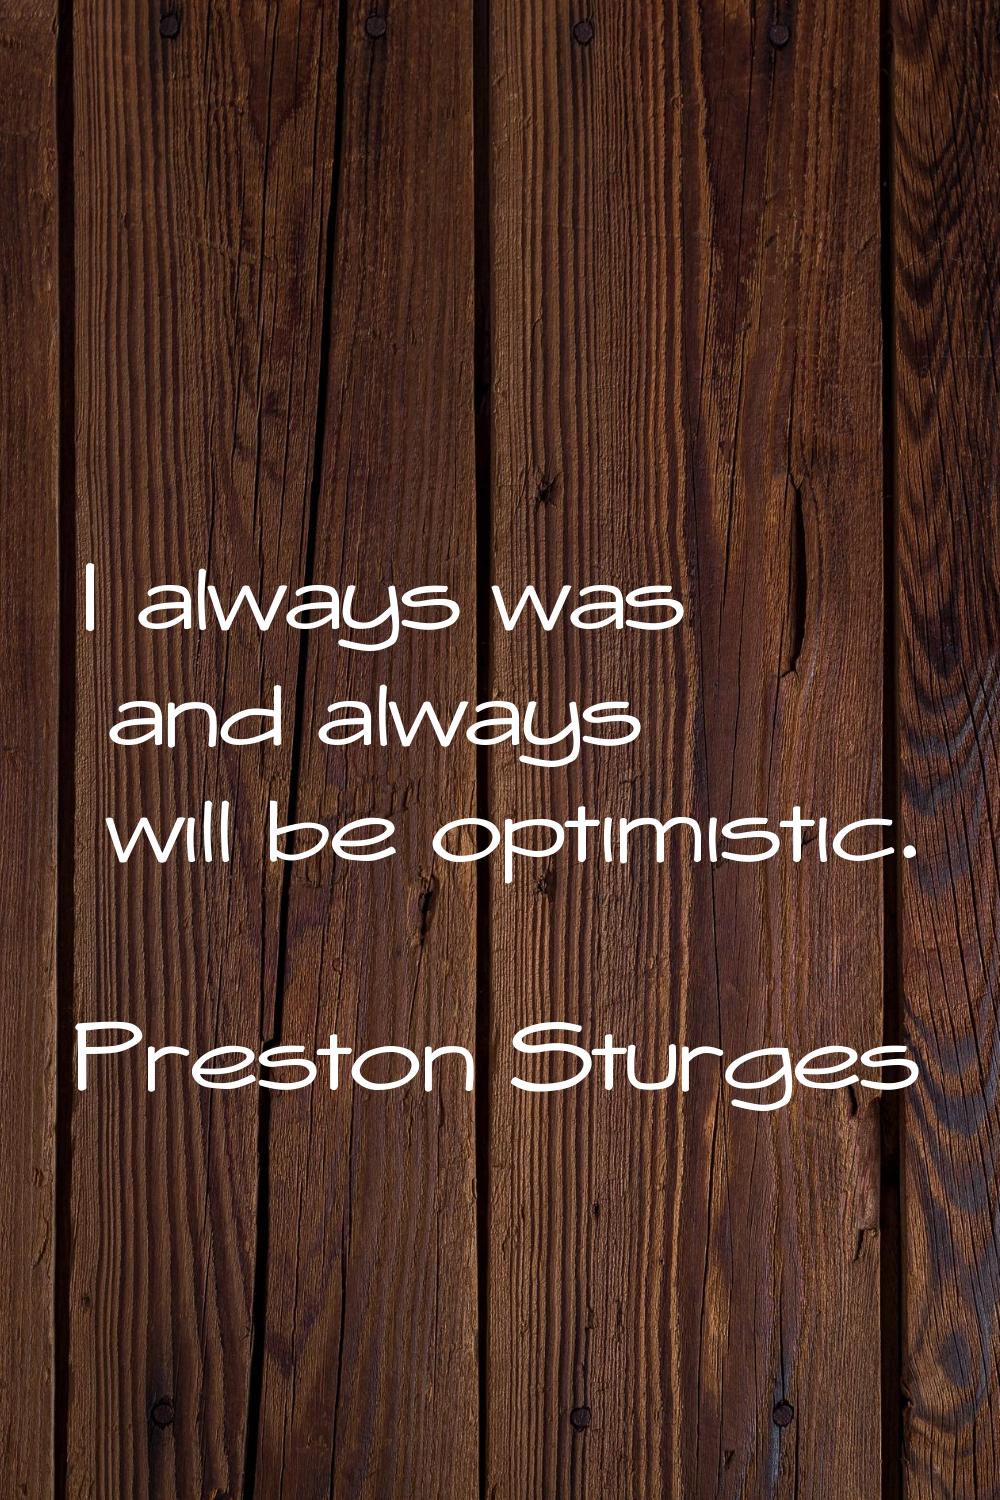 I always was and always will be optimistic.